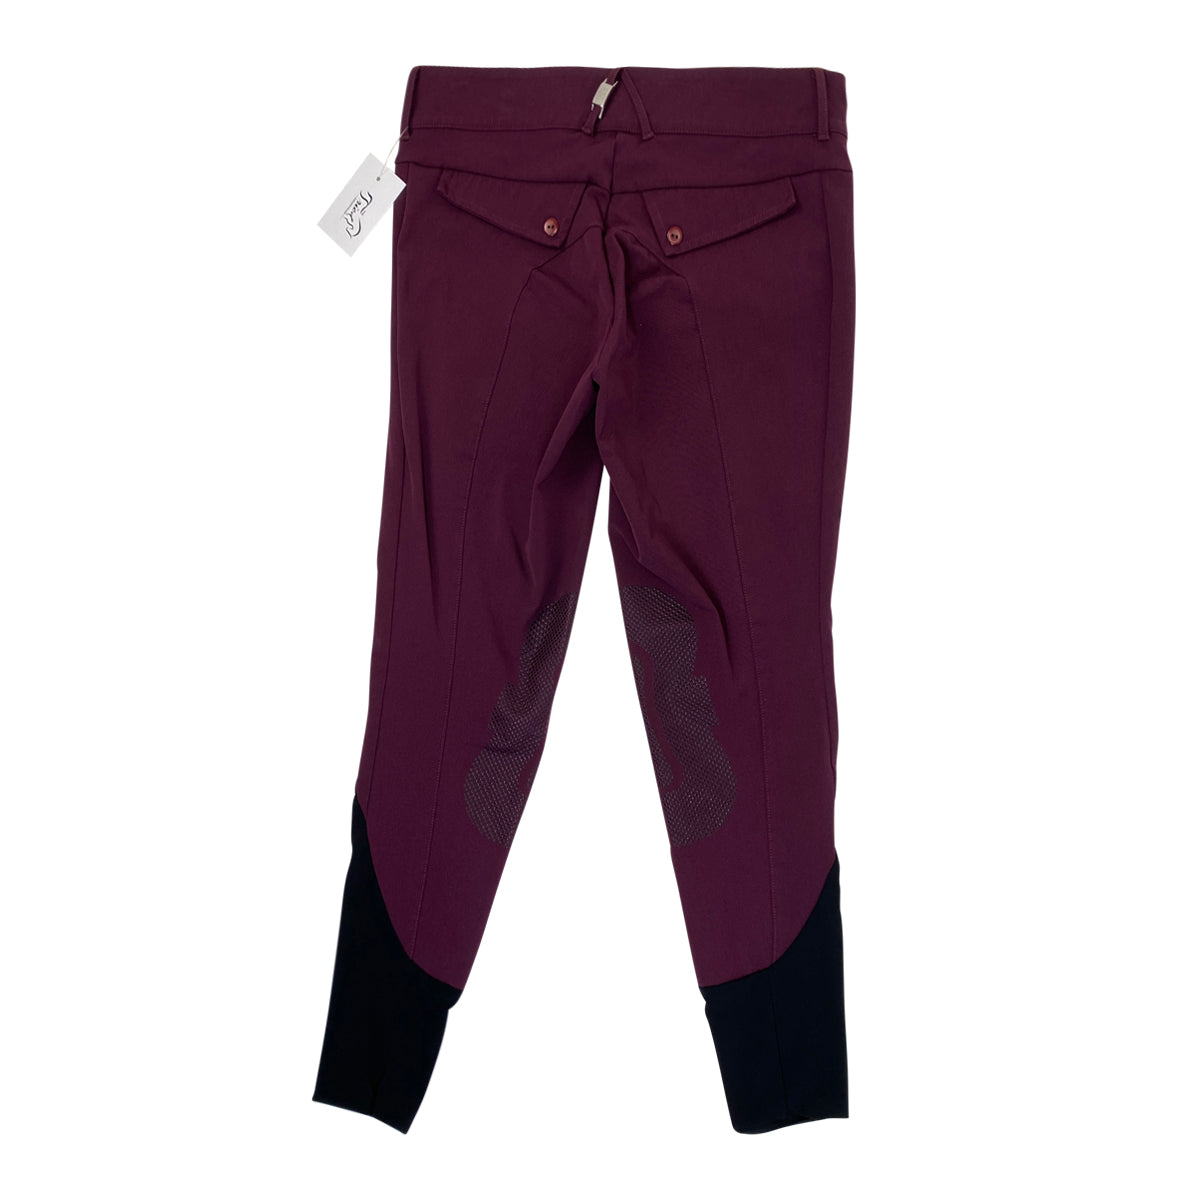 For Horses 'Emma' Breeches in Mulberry